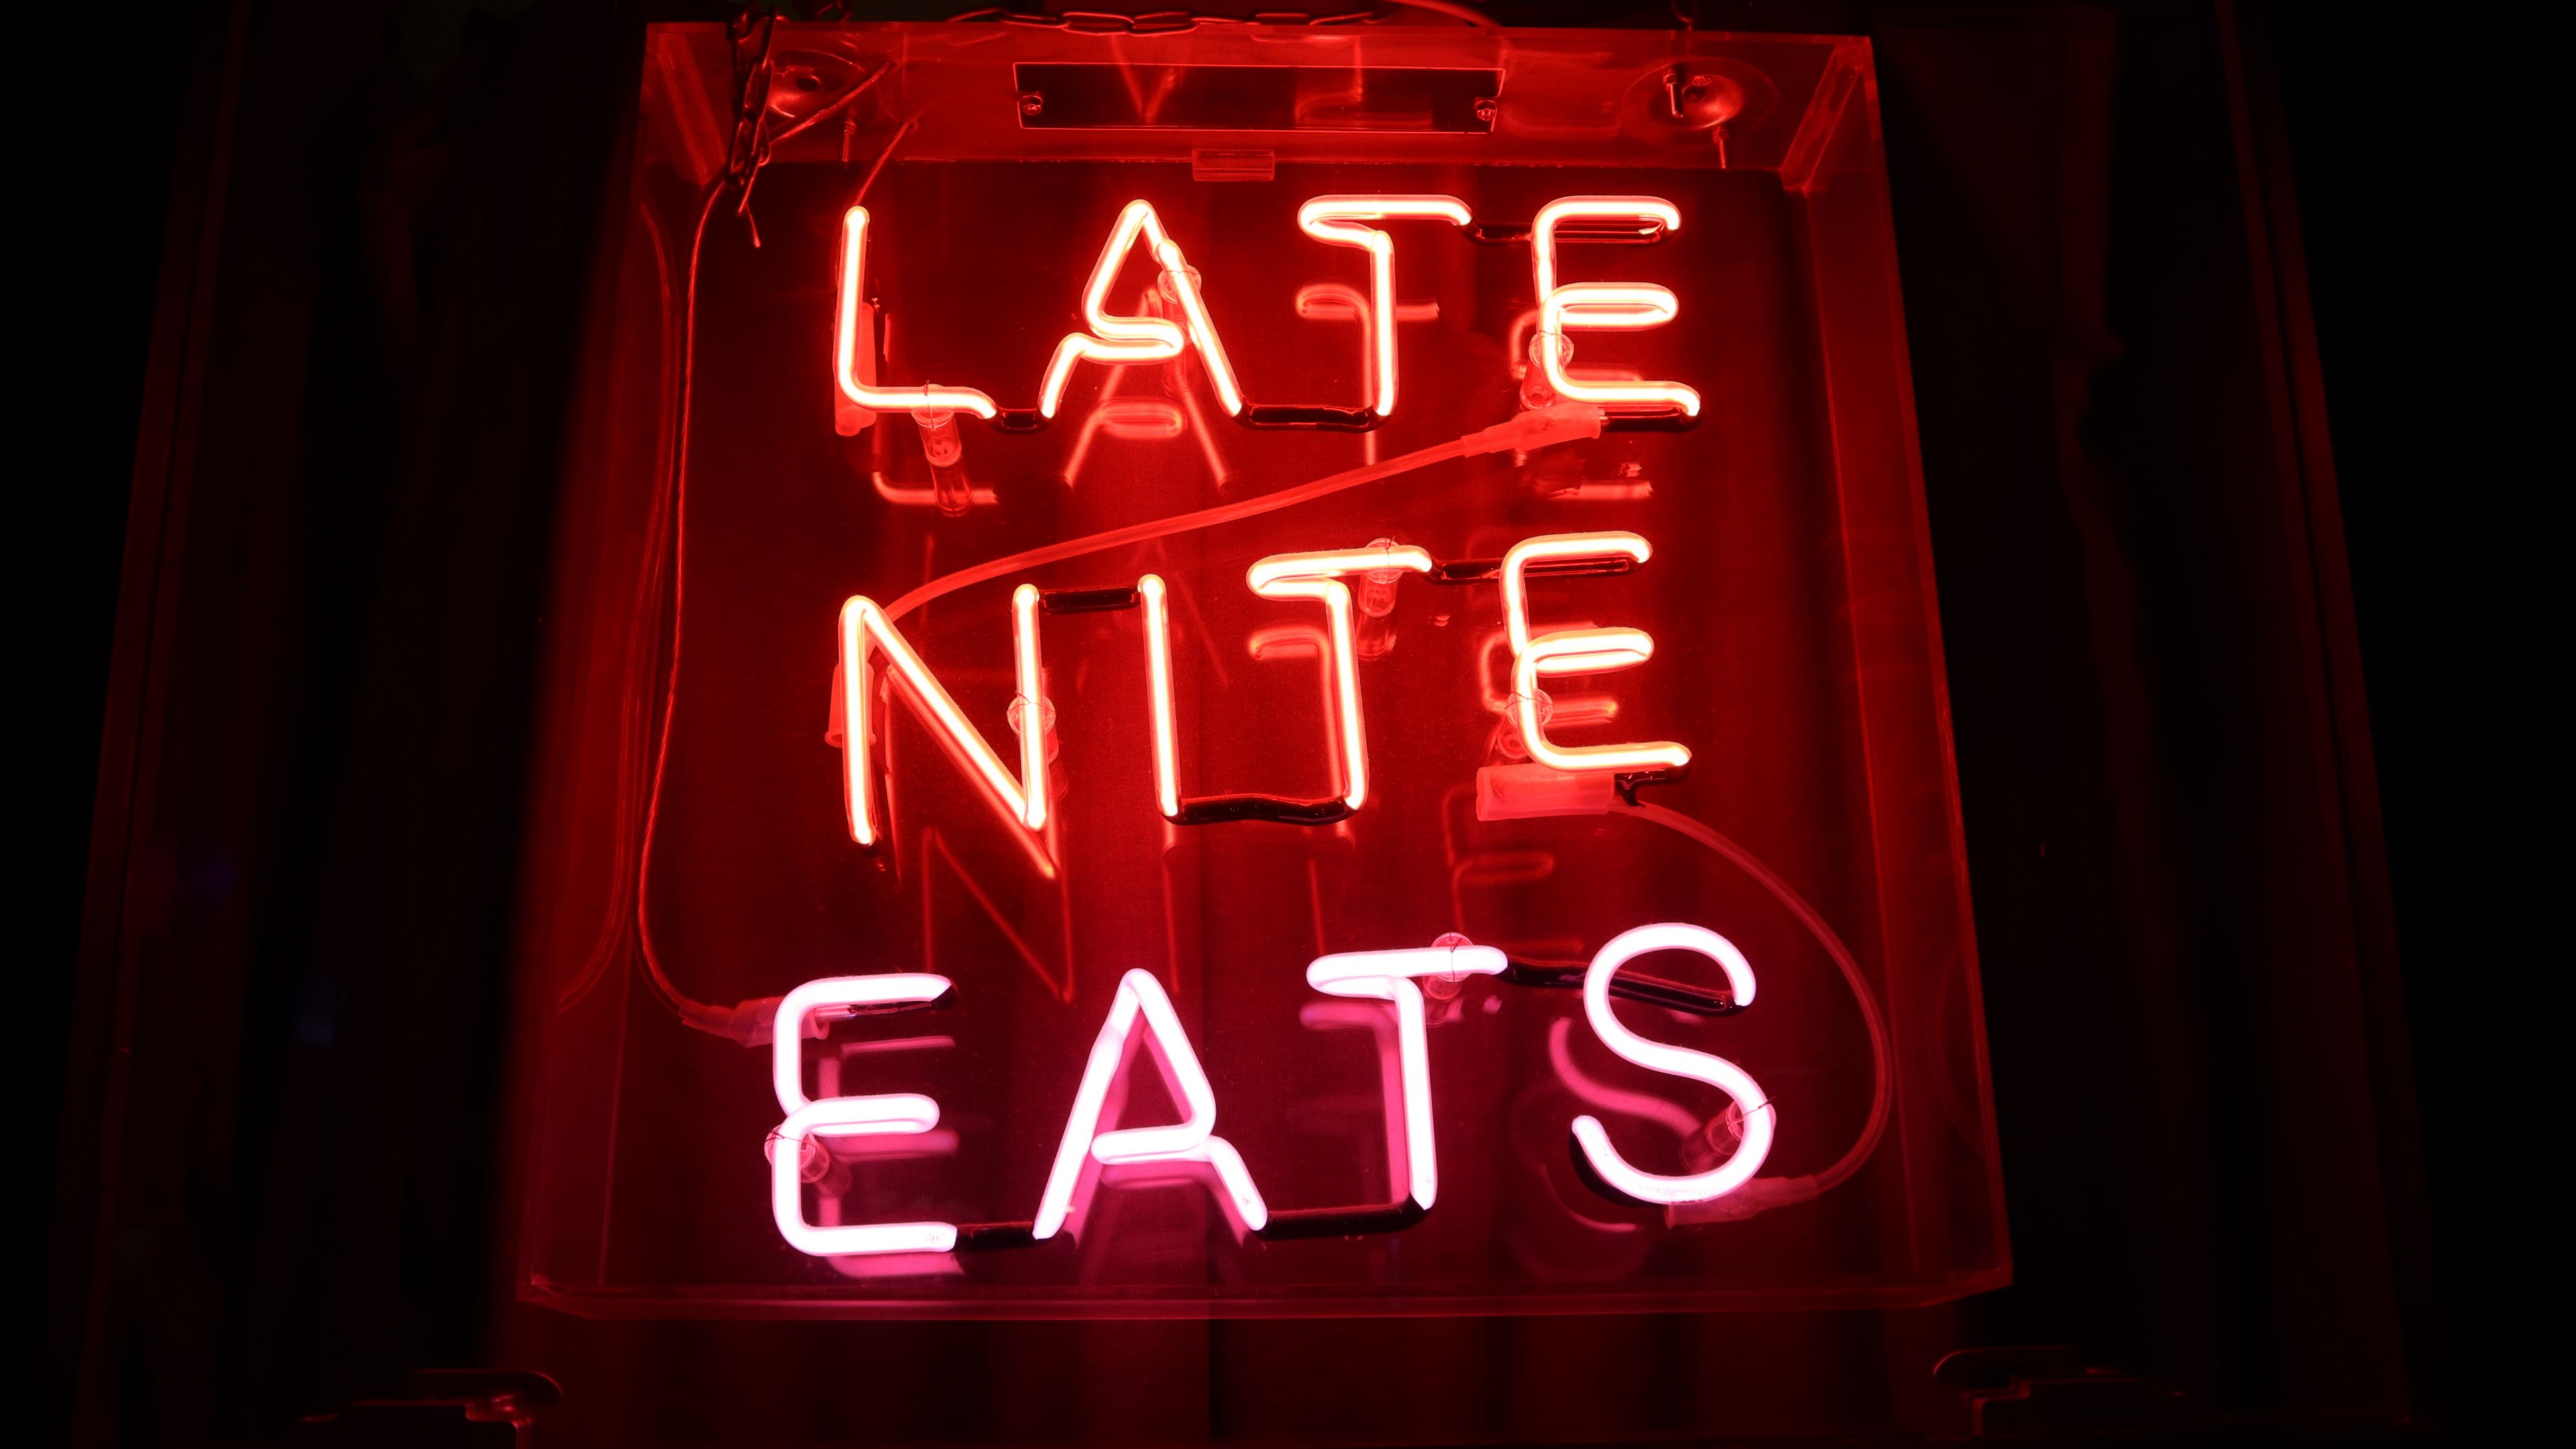 Download wallpaper 3840x2160 inscription, neon, lights, letters, text, late, nite, eats 4k uhd 16:9 HD background